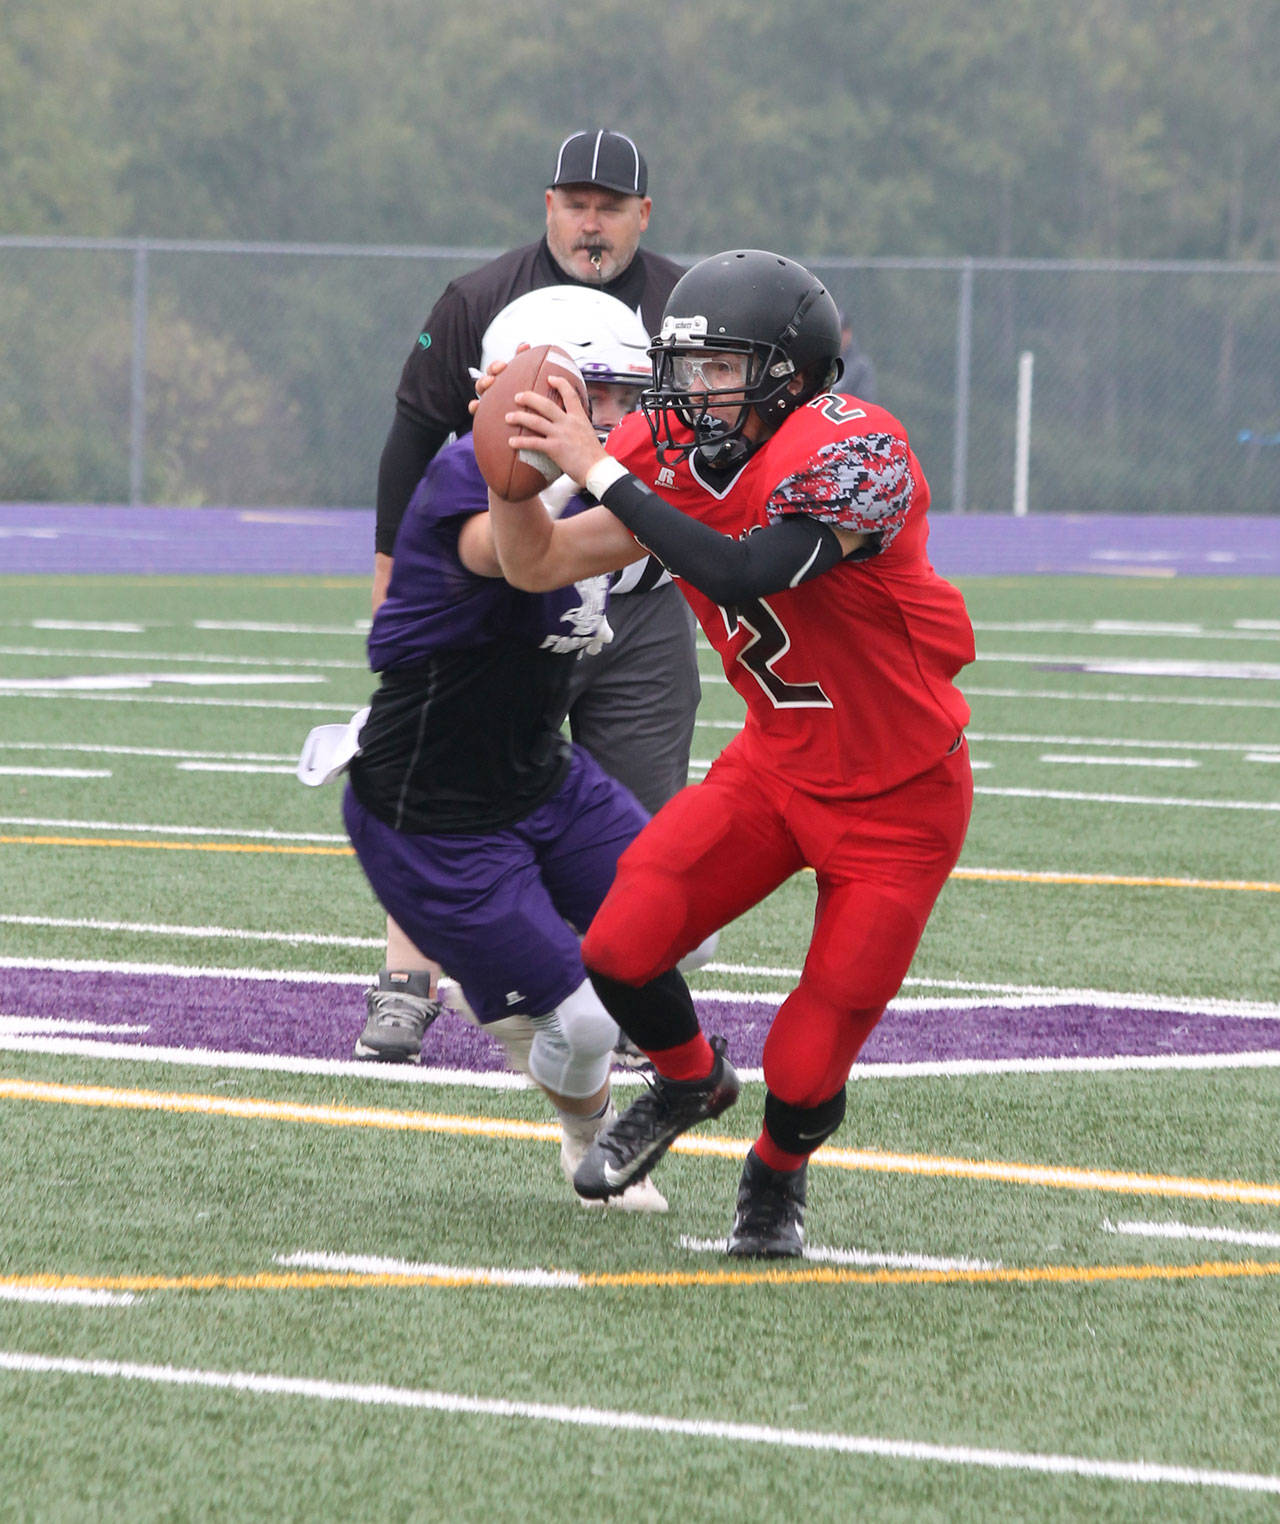 Coupeville quarterback Dawson Houston escapes an Anacortes defender in Saturday’s jamboree. (Photo by Jim Waller/Whidbey News-Times)